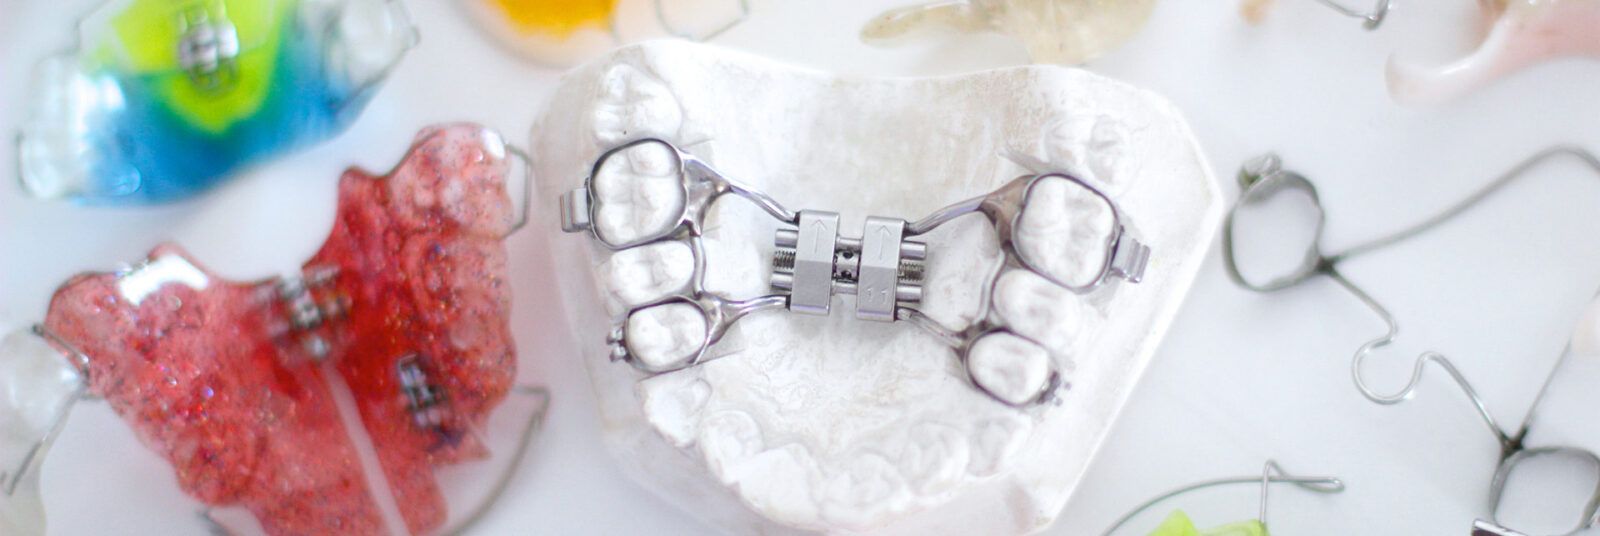 Colorful orthodontic appliances